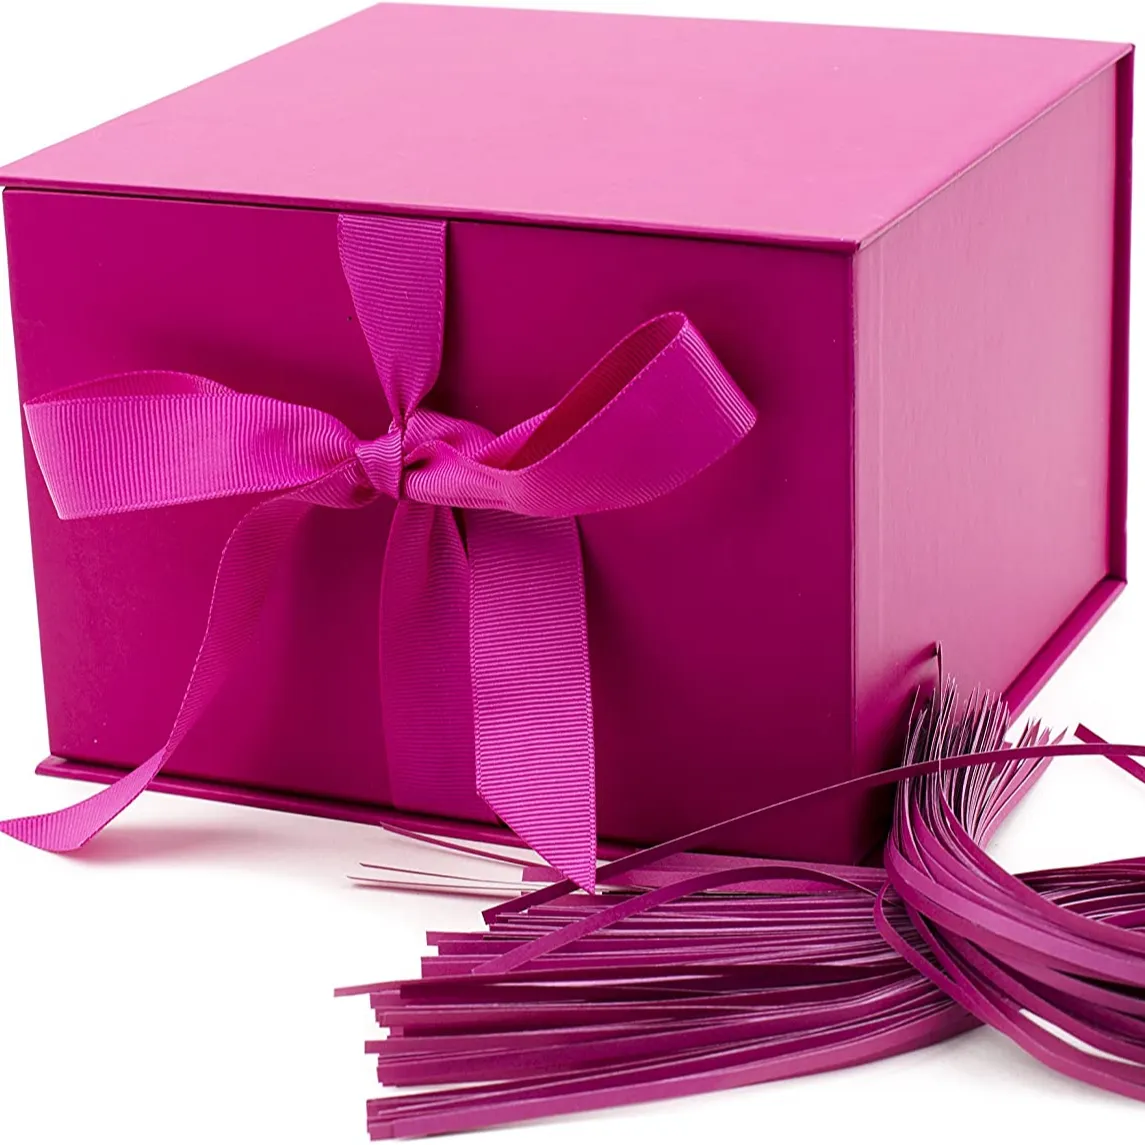 TH CB-015 Nordict Style Modern Gift Box Light Pink for Mother's Day, Birthdays, Bridal Showers, Wedding